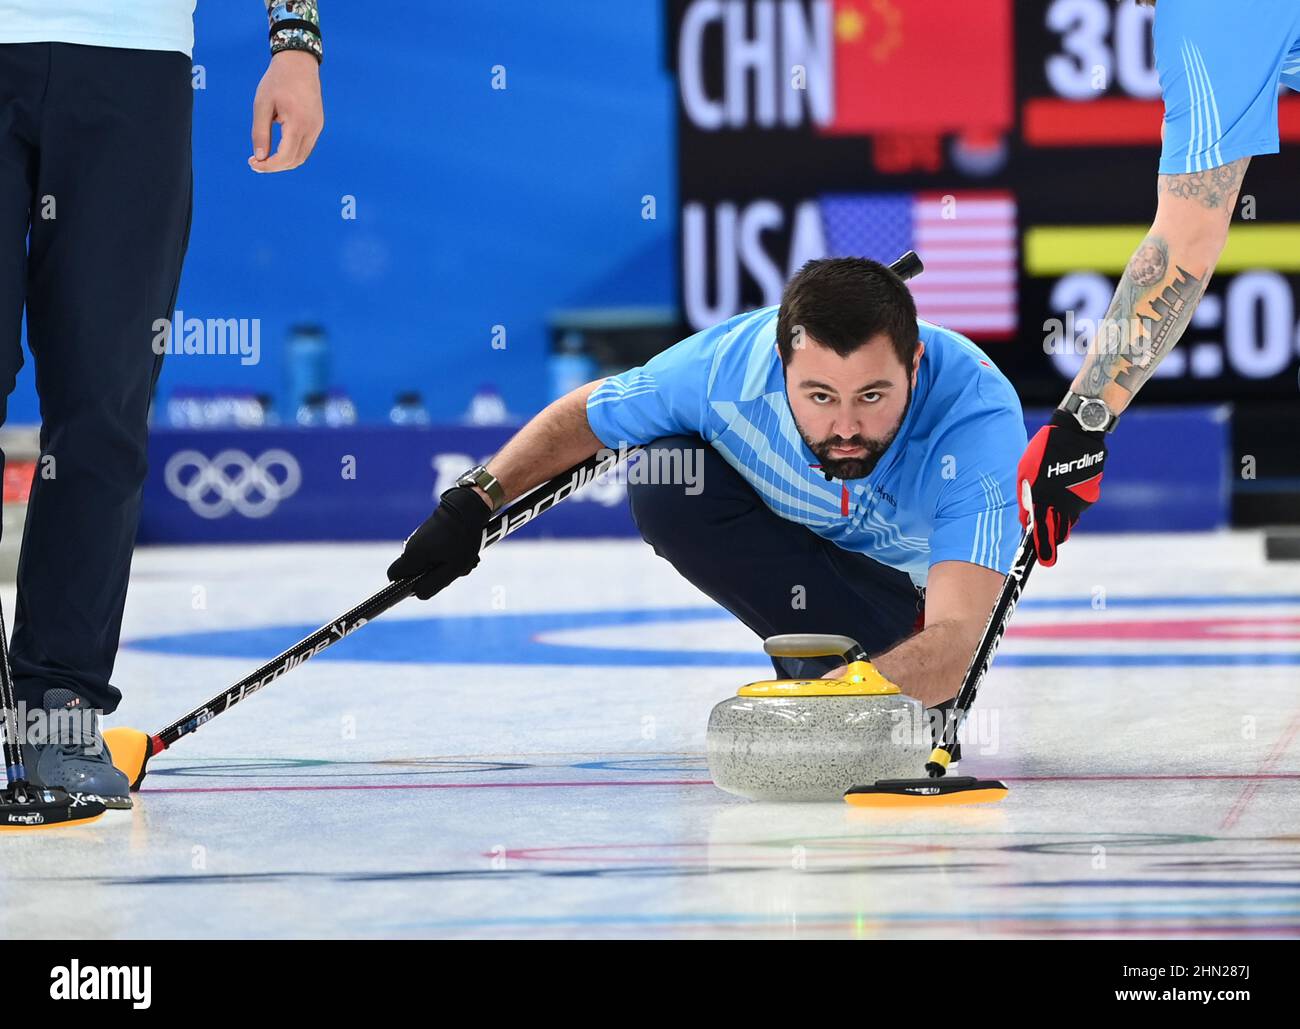 Beijing, China. 13th Feb, 2022. John Landsteiner of the United States competes during the curling men's round robin session 7 of the Beijing 2022 Winter Olympics between China and the United States at National Aquatics Centre in Beijing, capital of China, Feb. 13, 2022. Credit: Li He/Xinhua/Alamy Live News Stock Photo